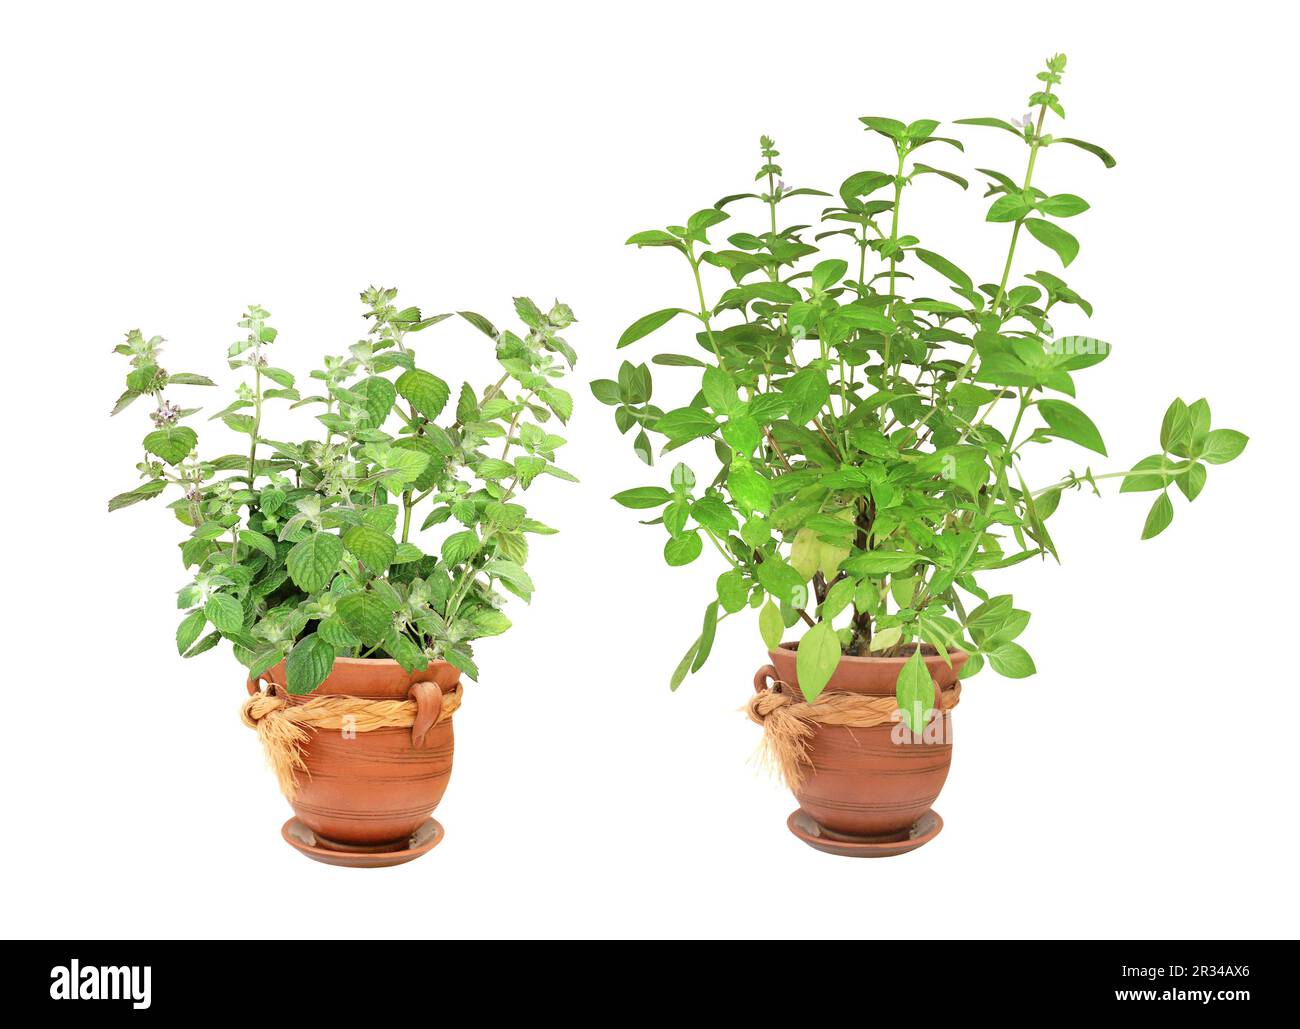 Lemon basil (Hoary basil, Ocimum africanum) and peppermint. Sprigs of Thai lemon basil and peppermint in flowerpots. Lao basil bush and mint in clay f Stock Photo